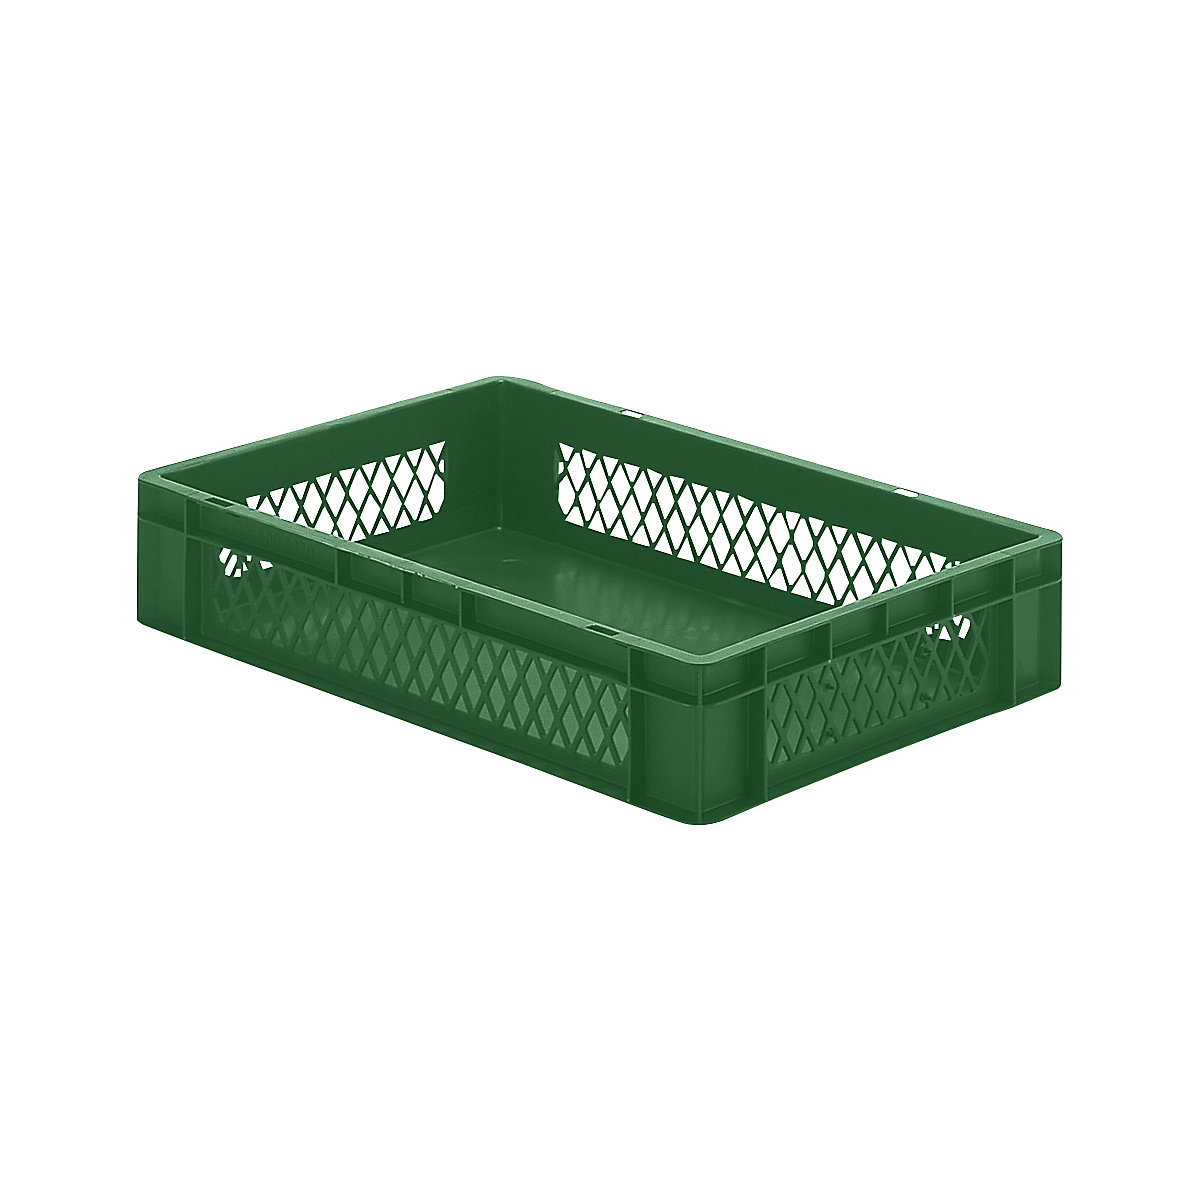 Euro stacking container, perforated walls, closed base, LxWxH 600 x 400 x 120 mm, green, pack of 5